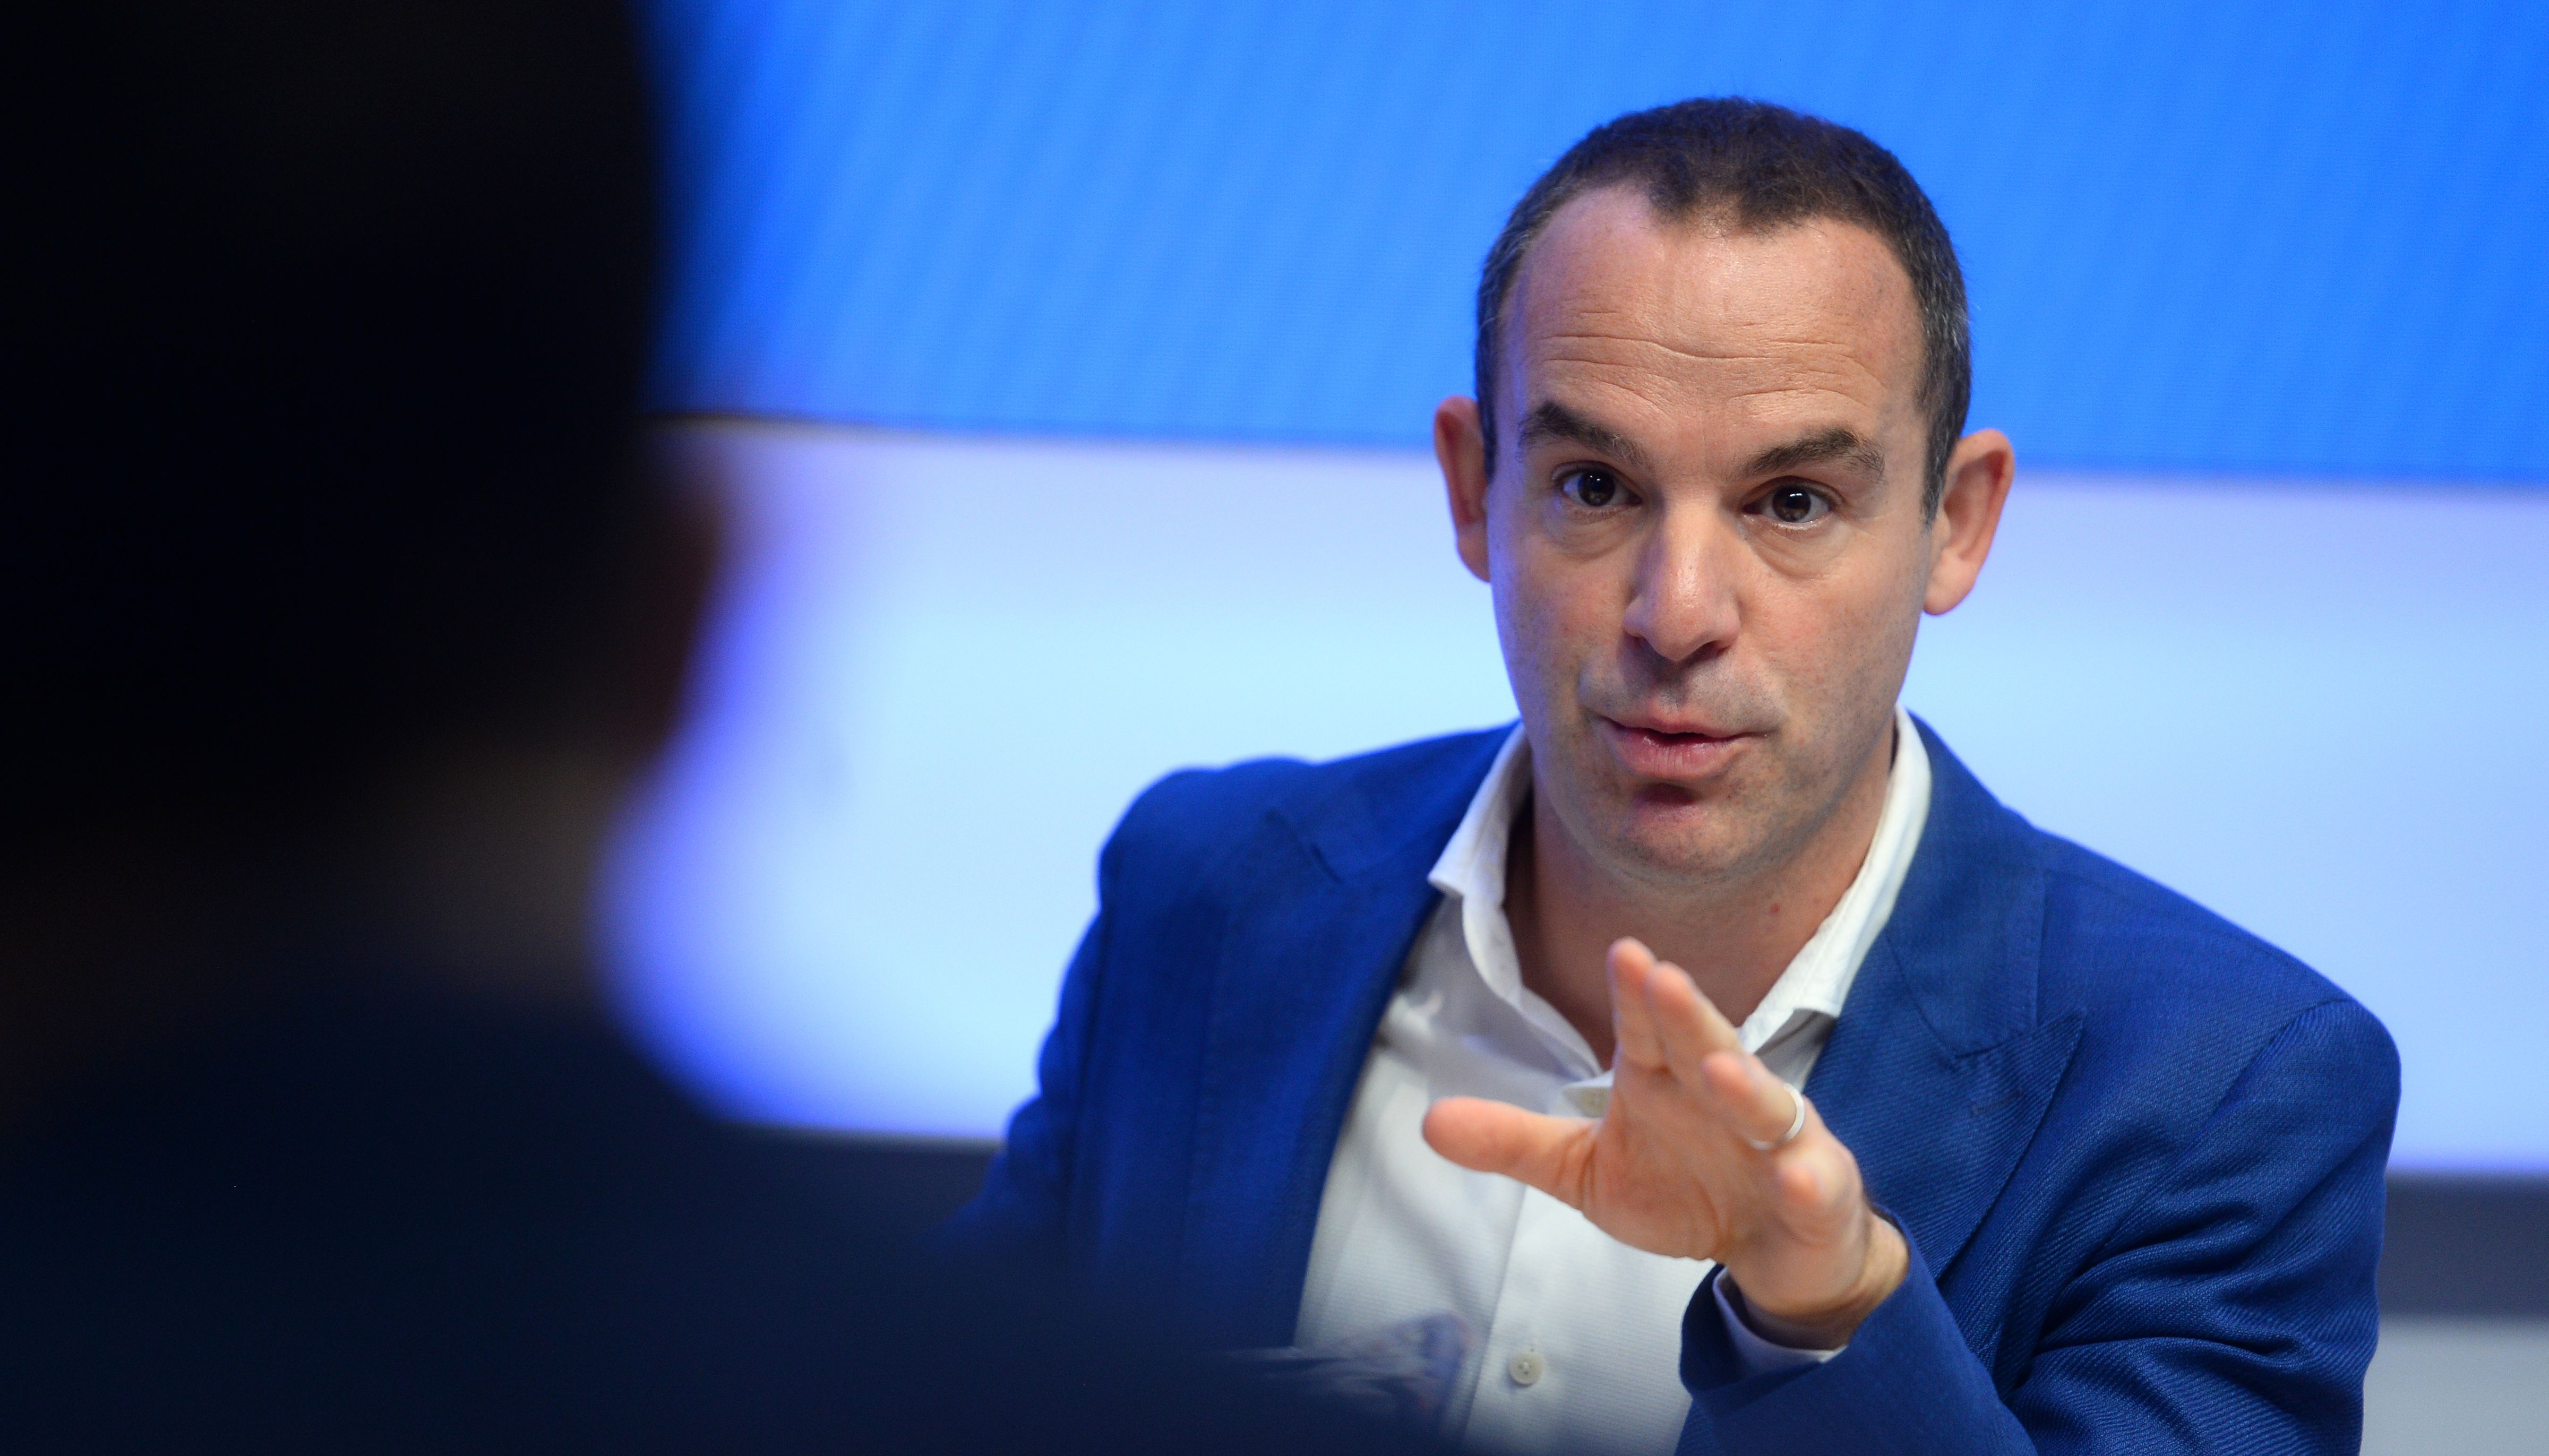 Money Saving Expert's Martin Lewis during a joint press conference with Facebook at the Facebook headquarters in London.